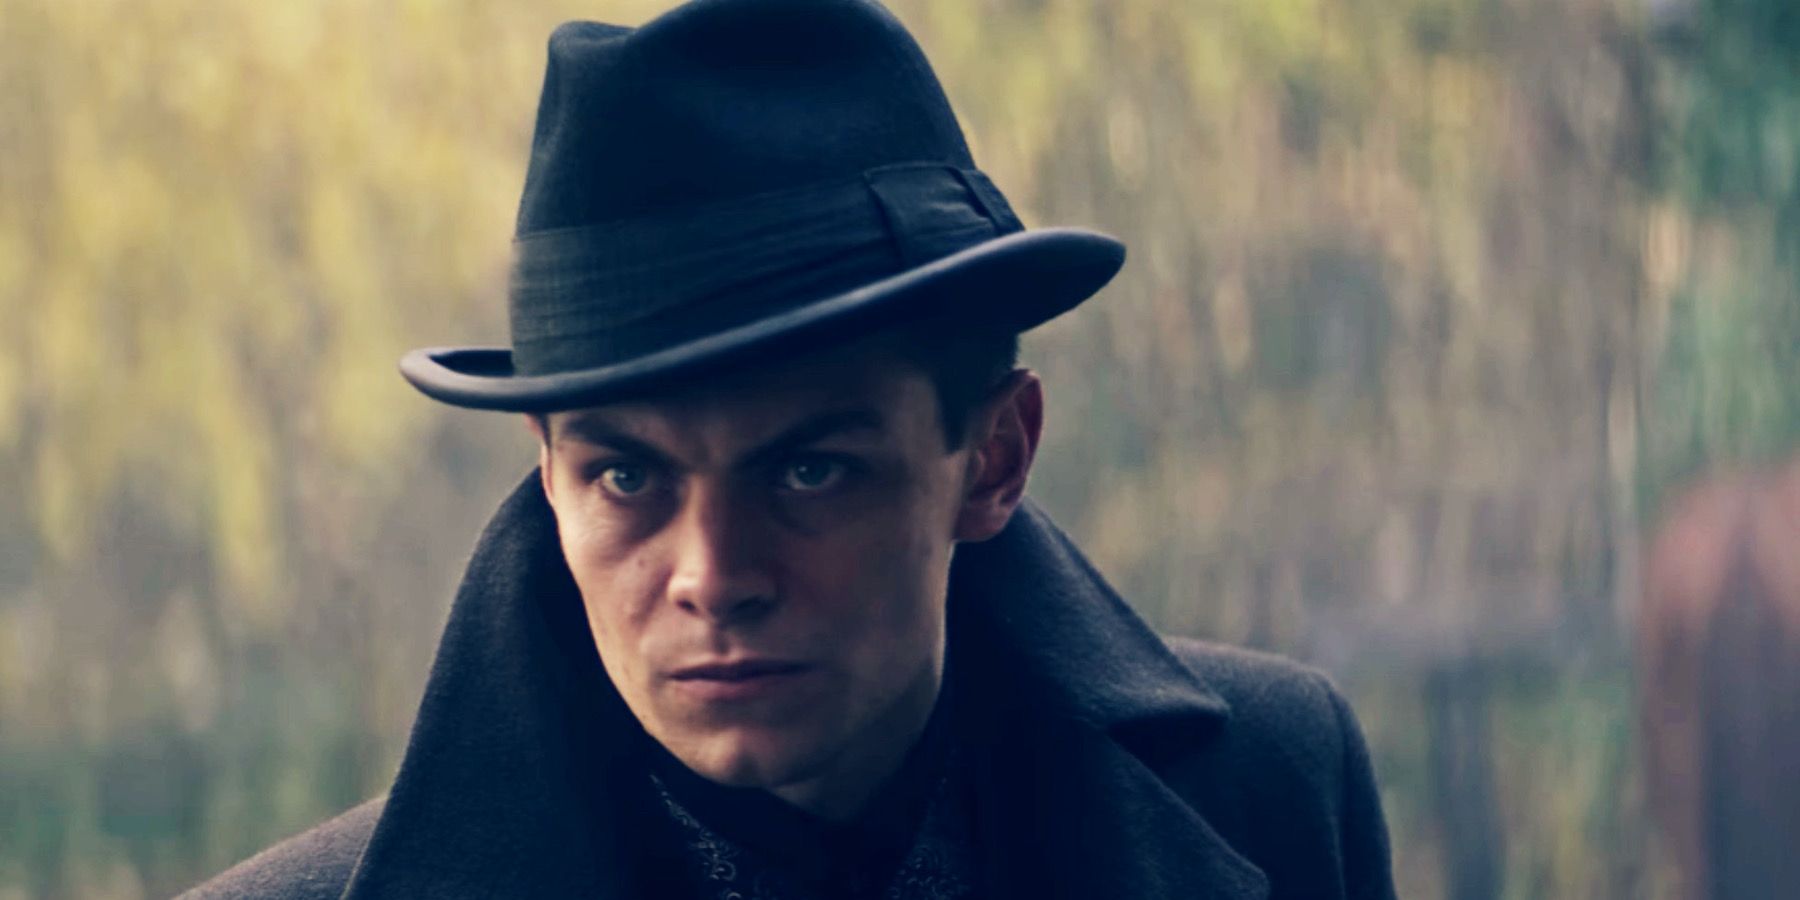 A close-up image of Kaz Brekker, a pale man with piercing blue eyes wearing a coat and a hat.